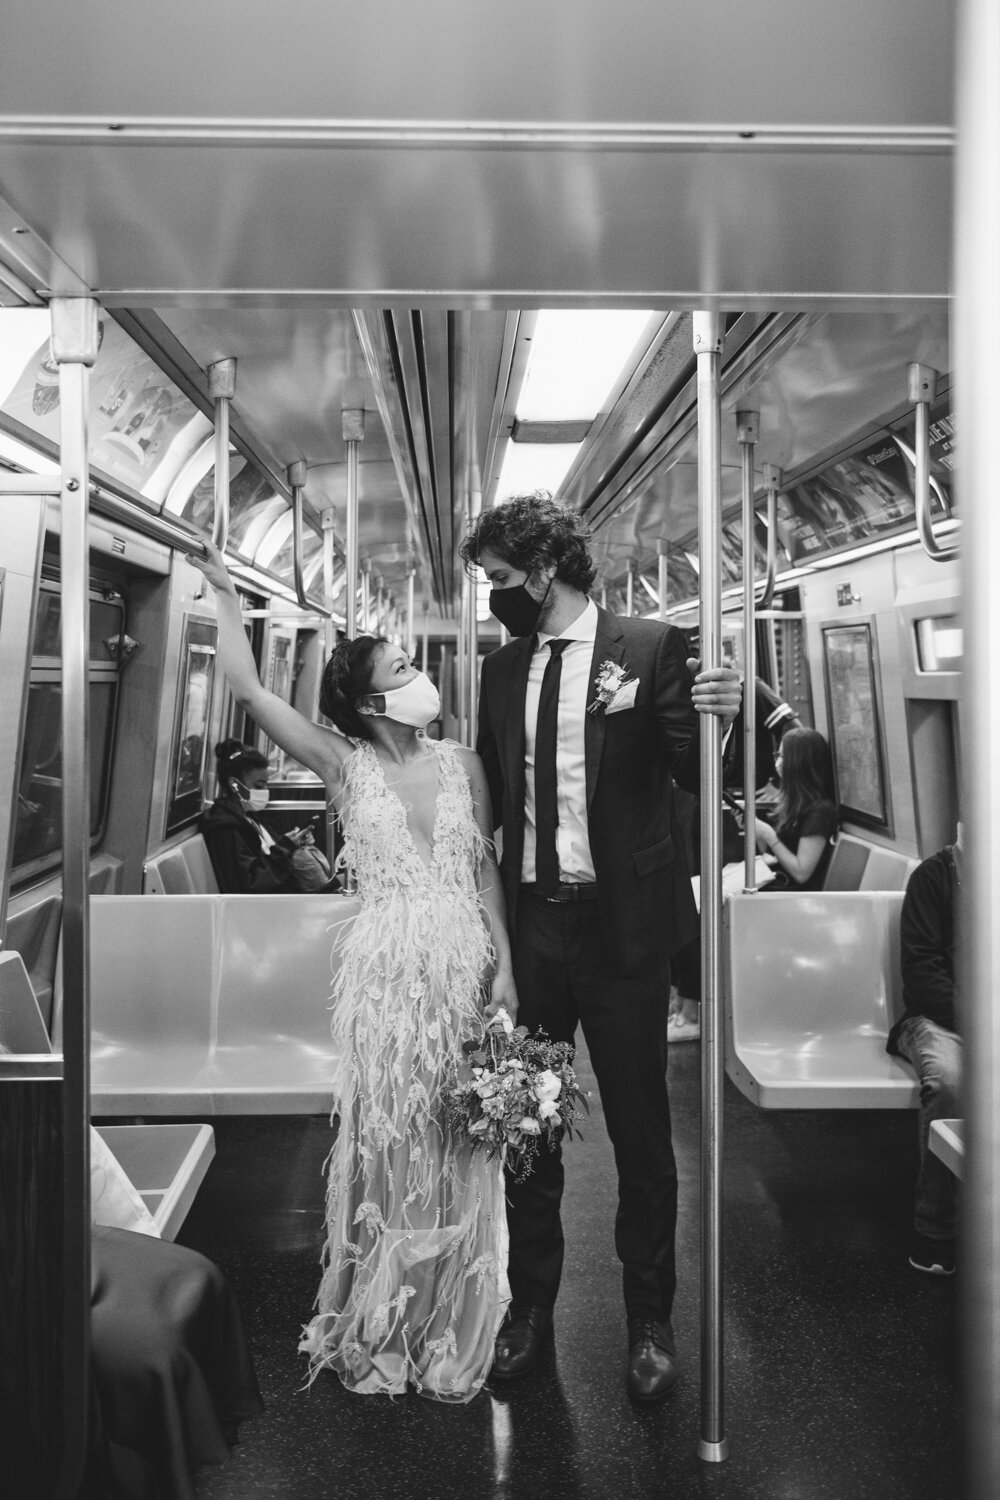 Bride and groom stand in a subway car and hold on to the poles. They are both wearing masks and looking into each other's eyes. 

Central Park Wedding Photography. Williamsburg Bridge Bridal Portraits. Luxury NYC Wedding Photographer. Manhattan Micro Wedding.